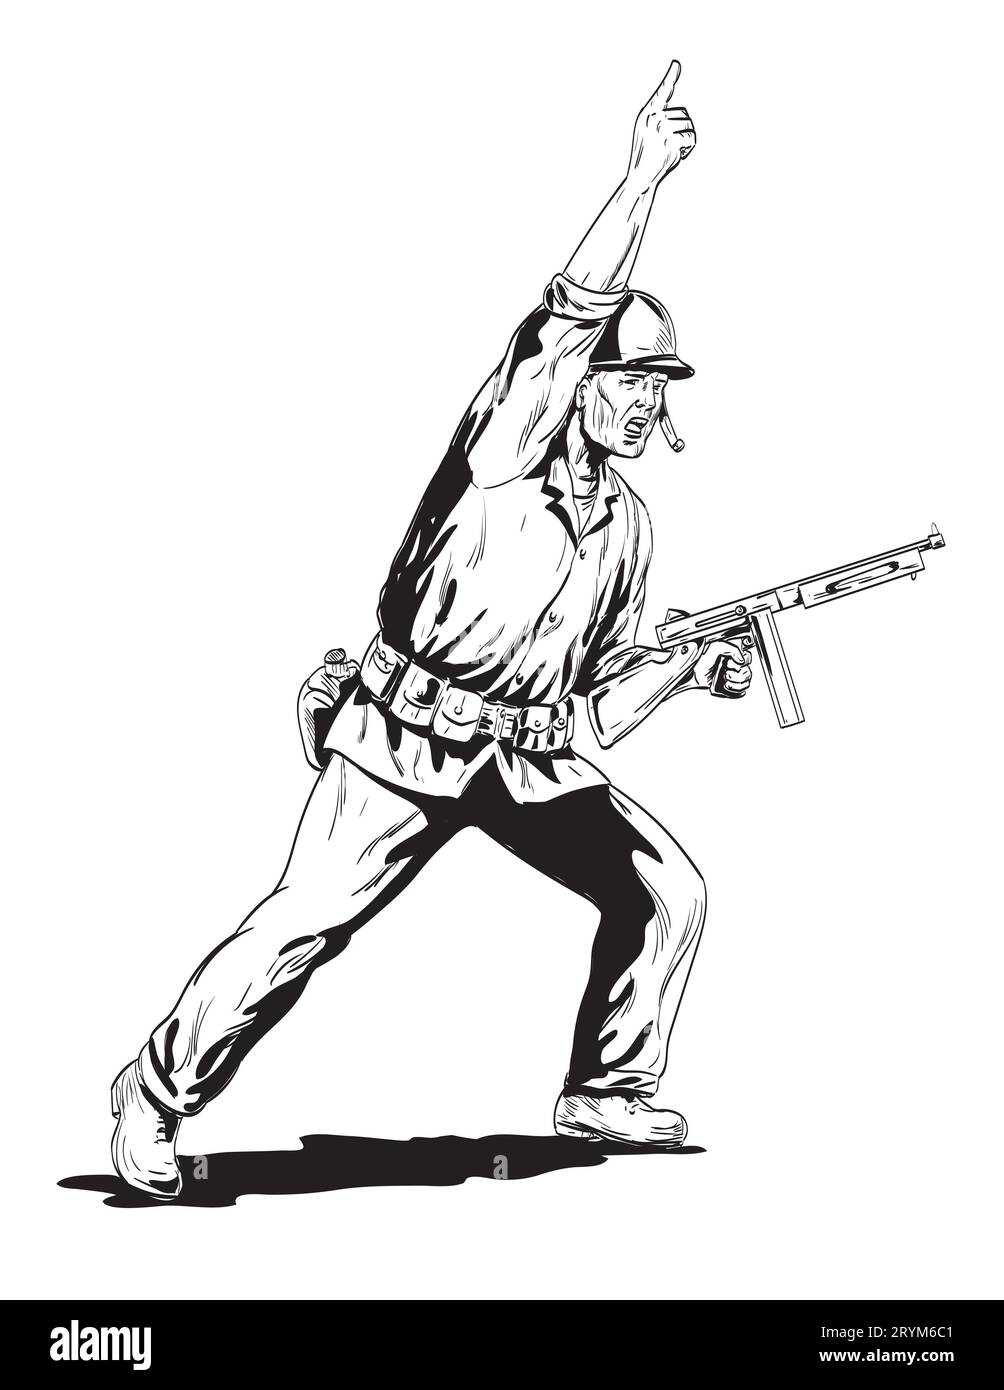 World War Two American GI Soldier With Rifle Leading Charge Side Angle View Comics Style Drawing Stock Photo